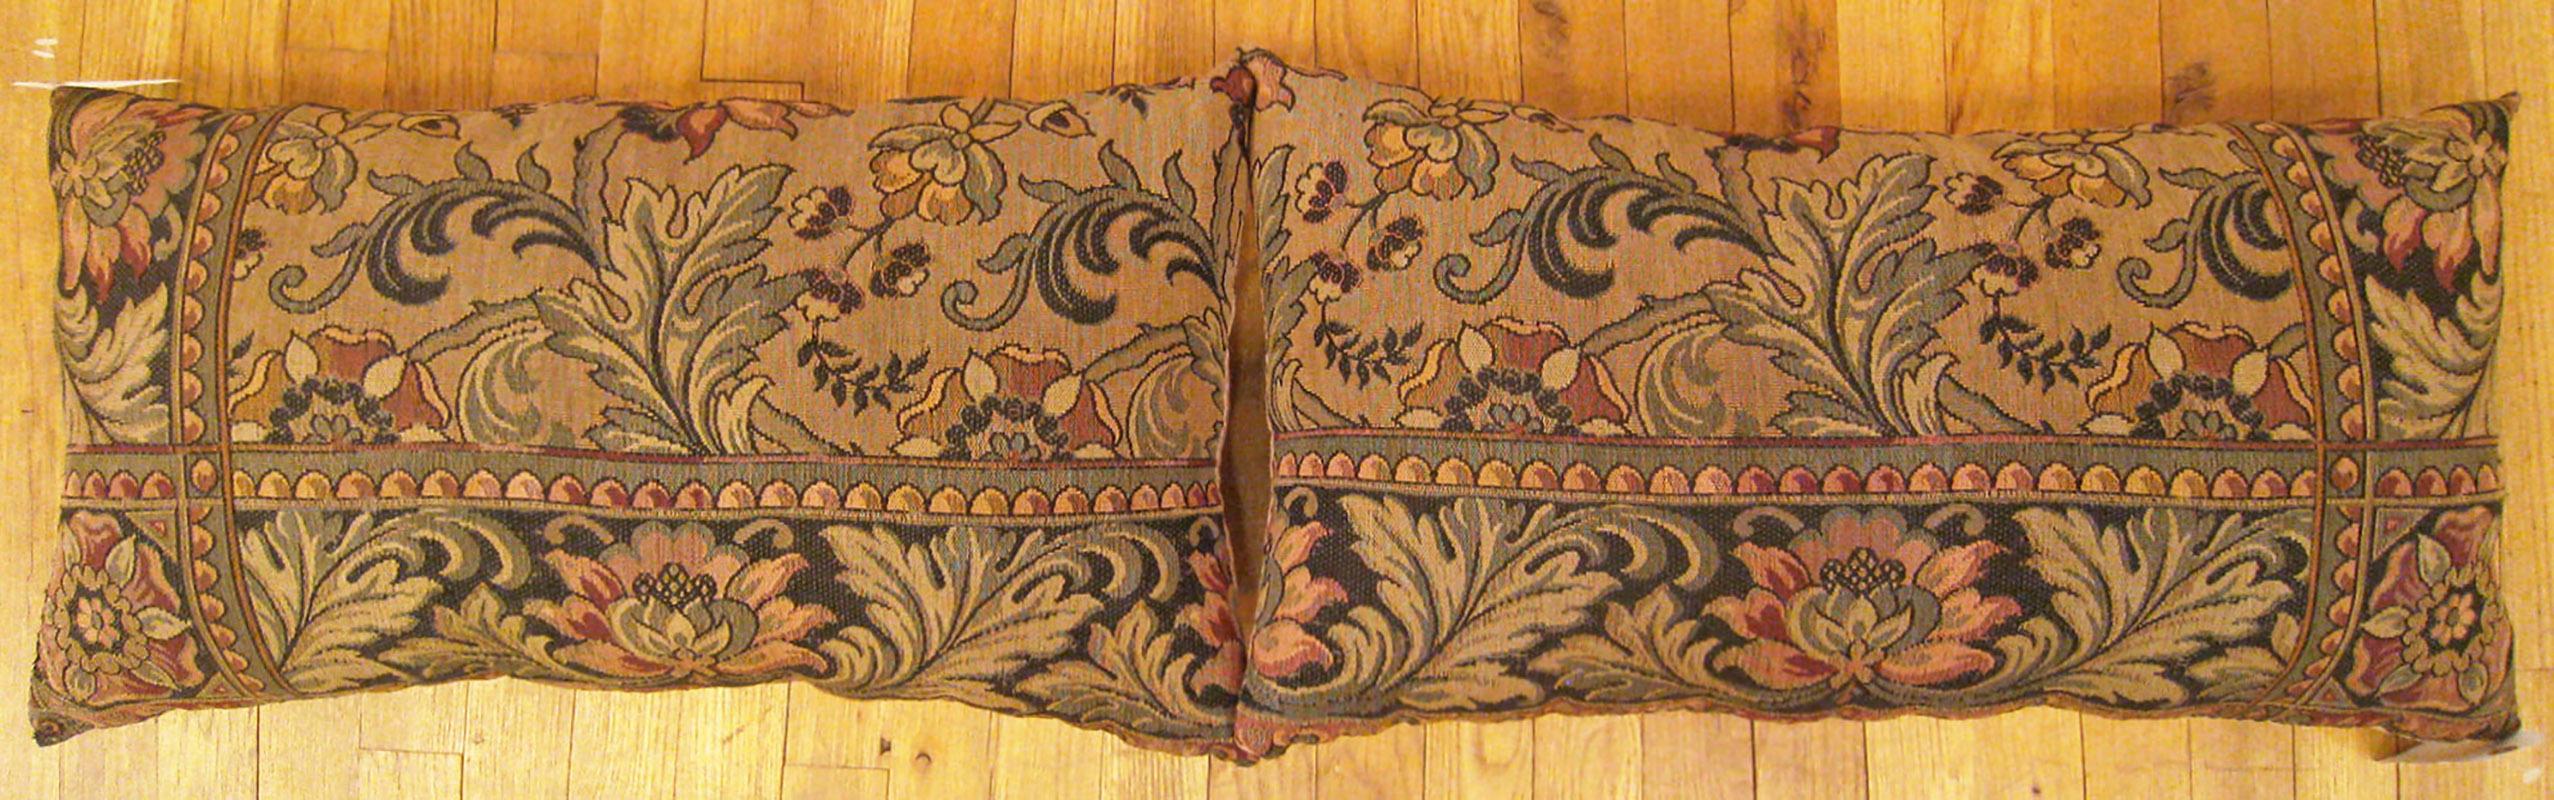 A pair of antique Jacquard Tapestry pillows ; size 1'3” x 2'2” Each.

An antique decorative pillows with floral elements allover a brown central field, size 1'3